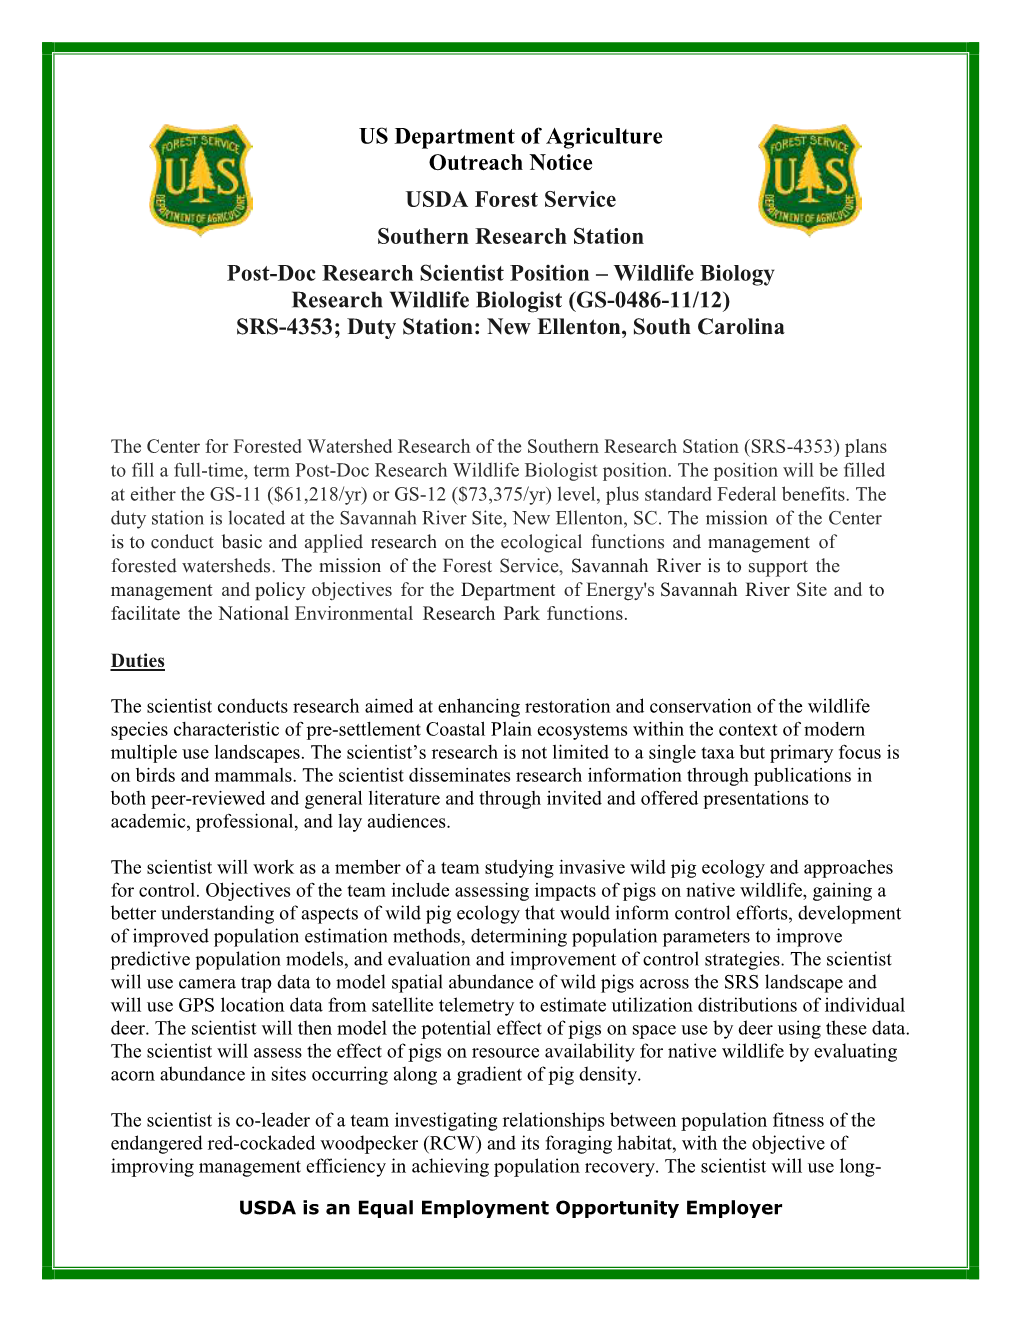 US Department of Agriculture Outreach Notice USDA Forest